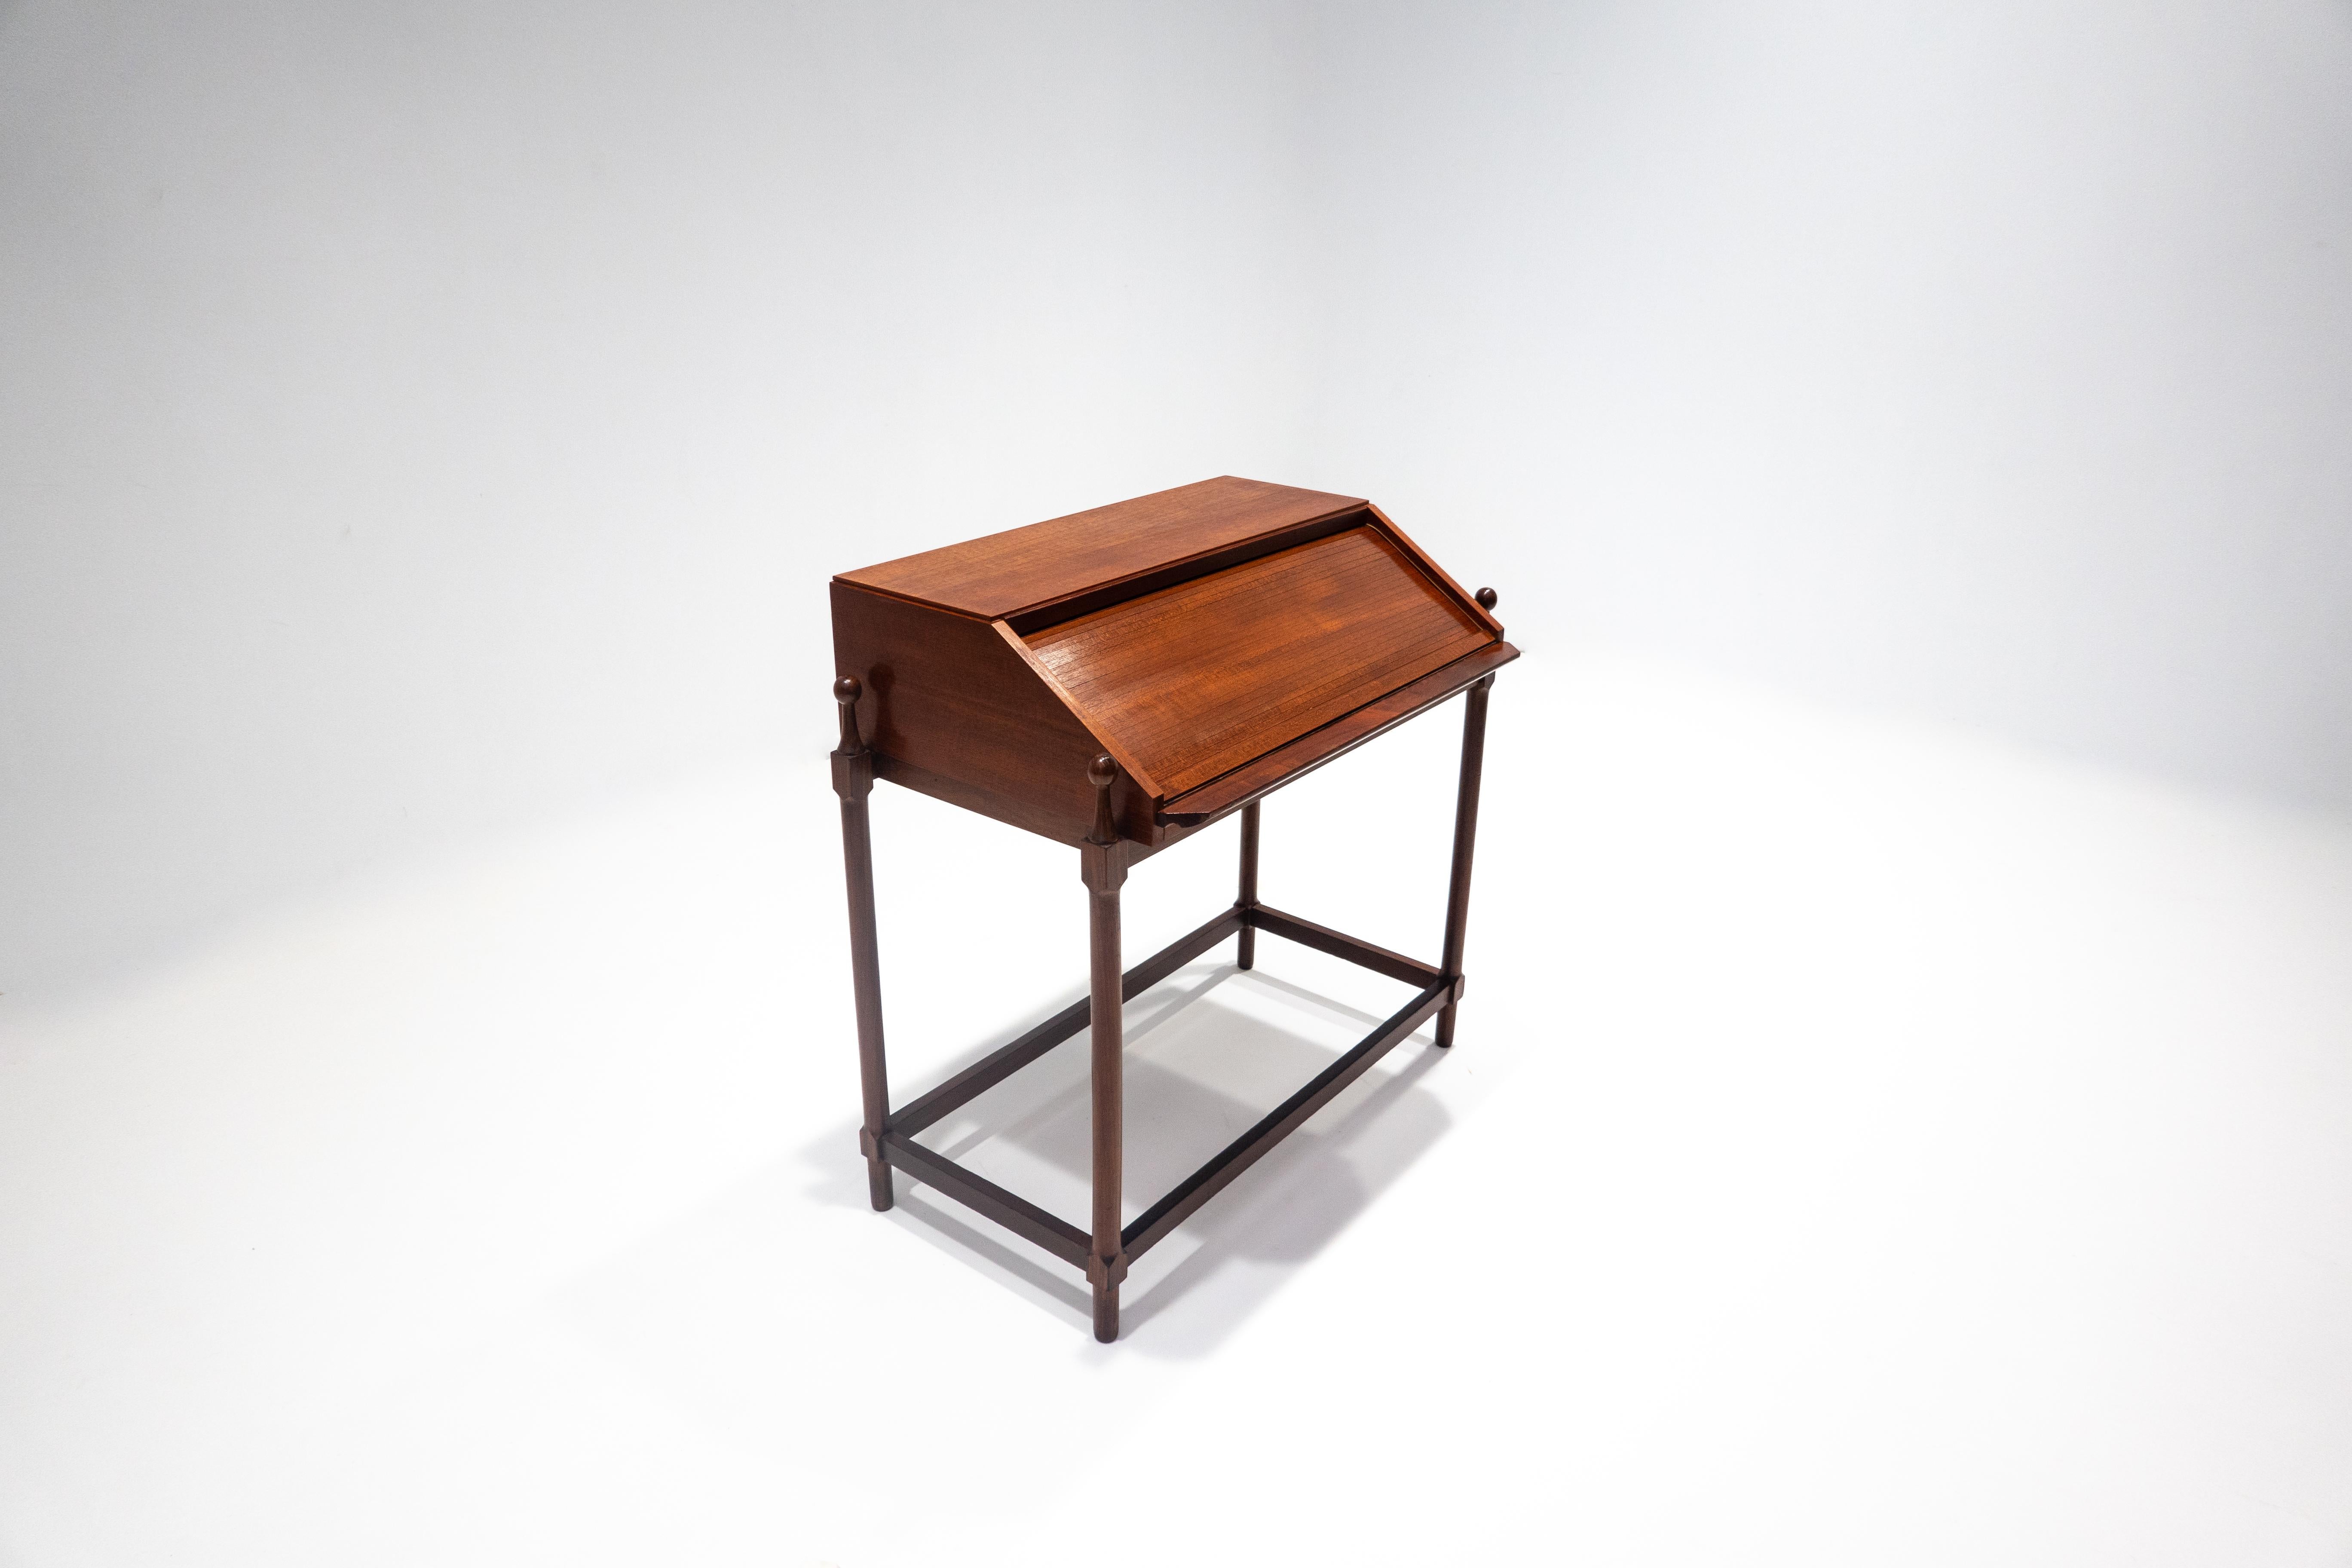 Italian Mid-Century Modern Wooden Writing Desk by Fratelli Proserpio, Italy, 1960s For Sale